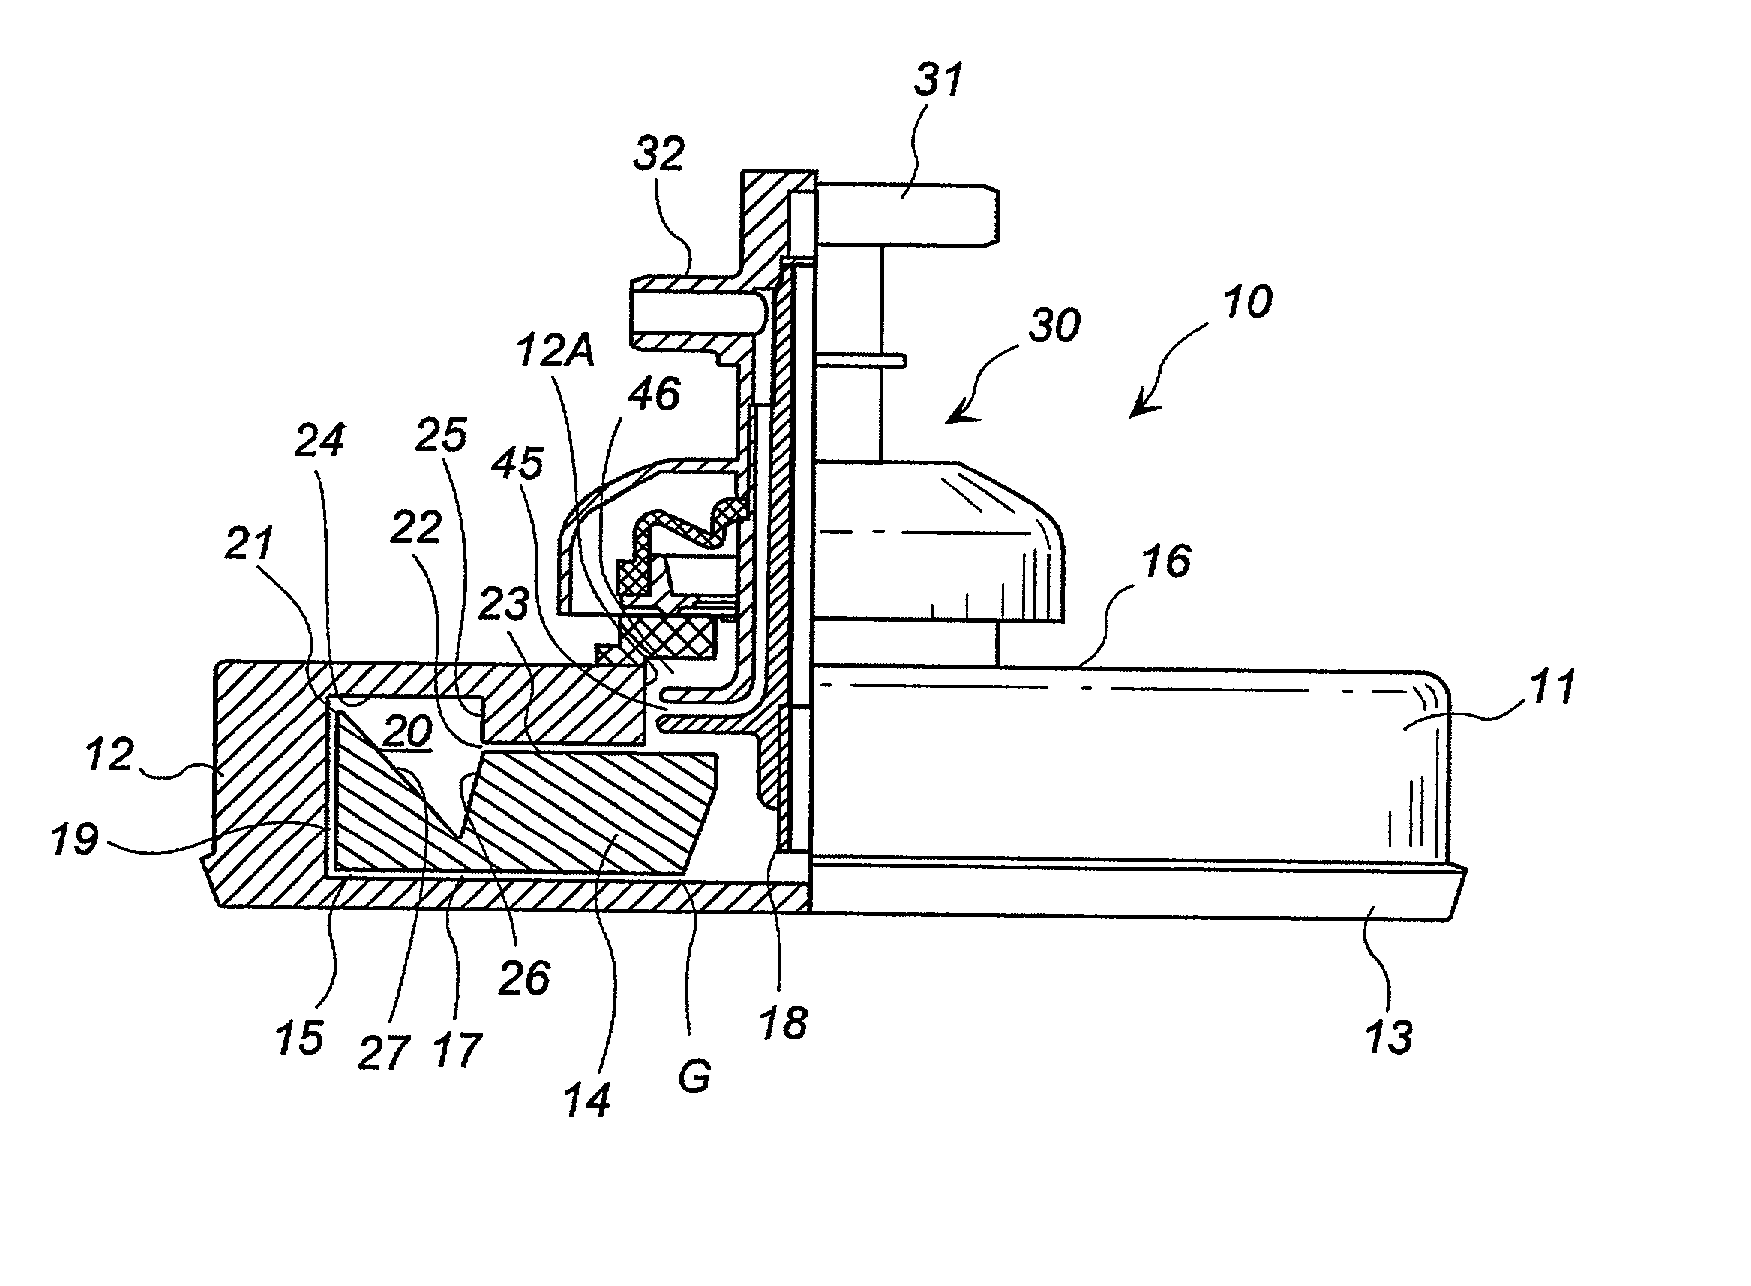 Centrifuge bowl for separating particles